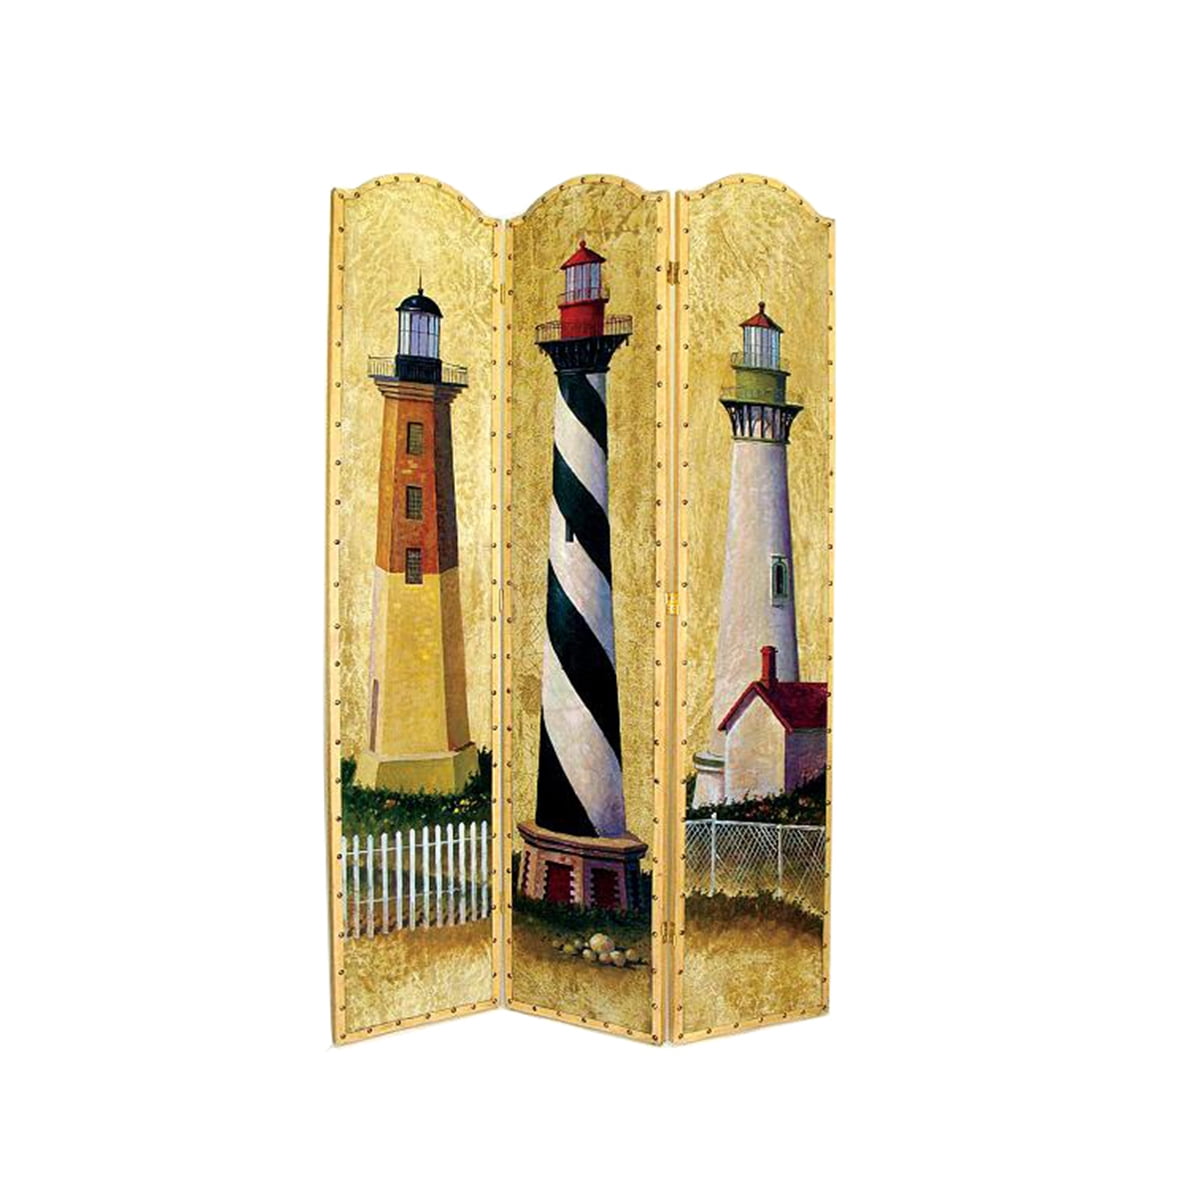 Bm210114 Hand Painted 3 Panel Wooden Room Divider With Lighthouses Print, Multi Color